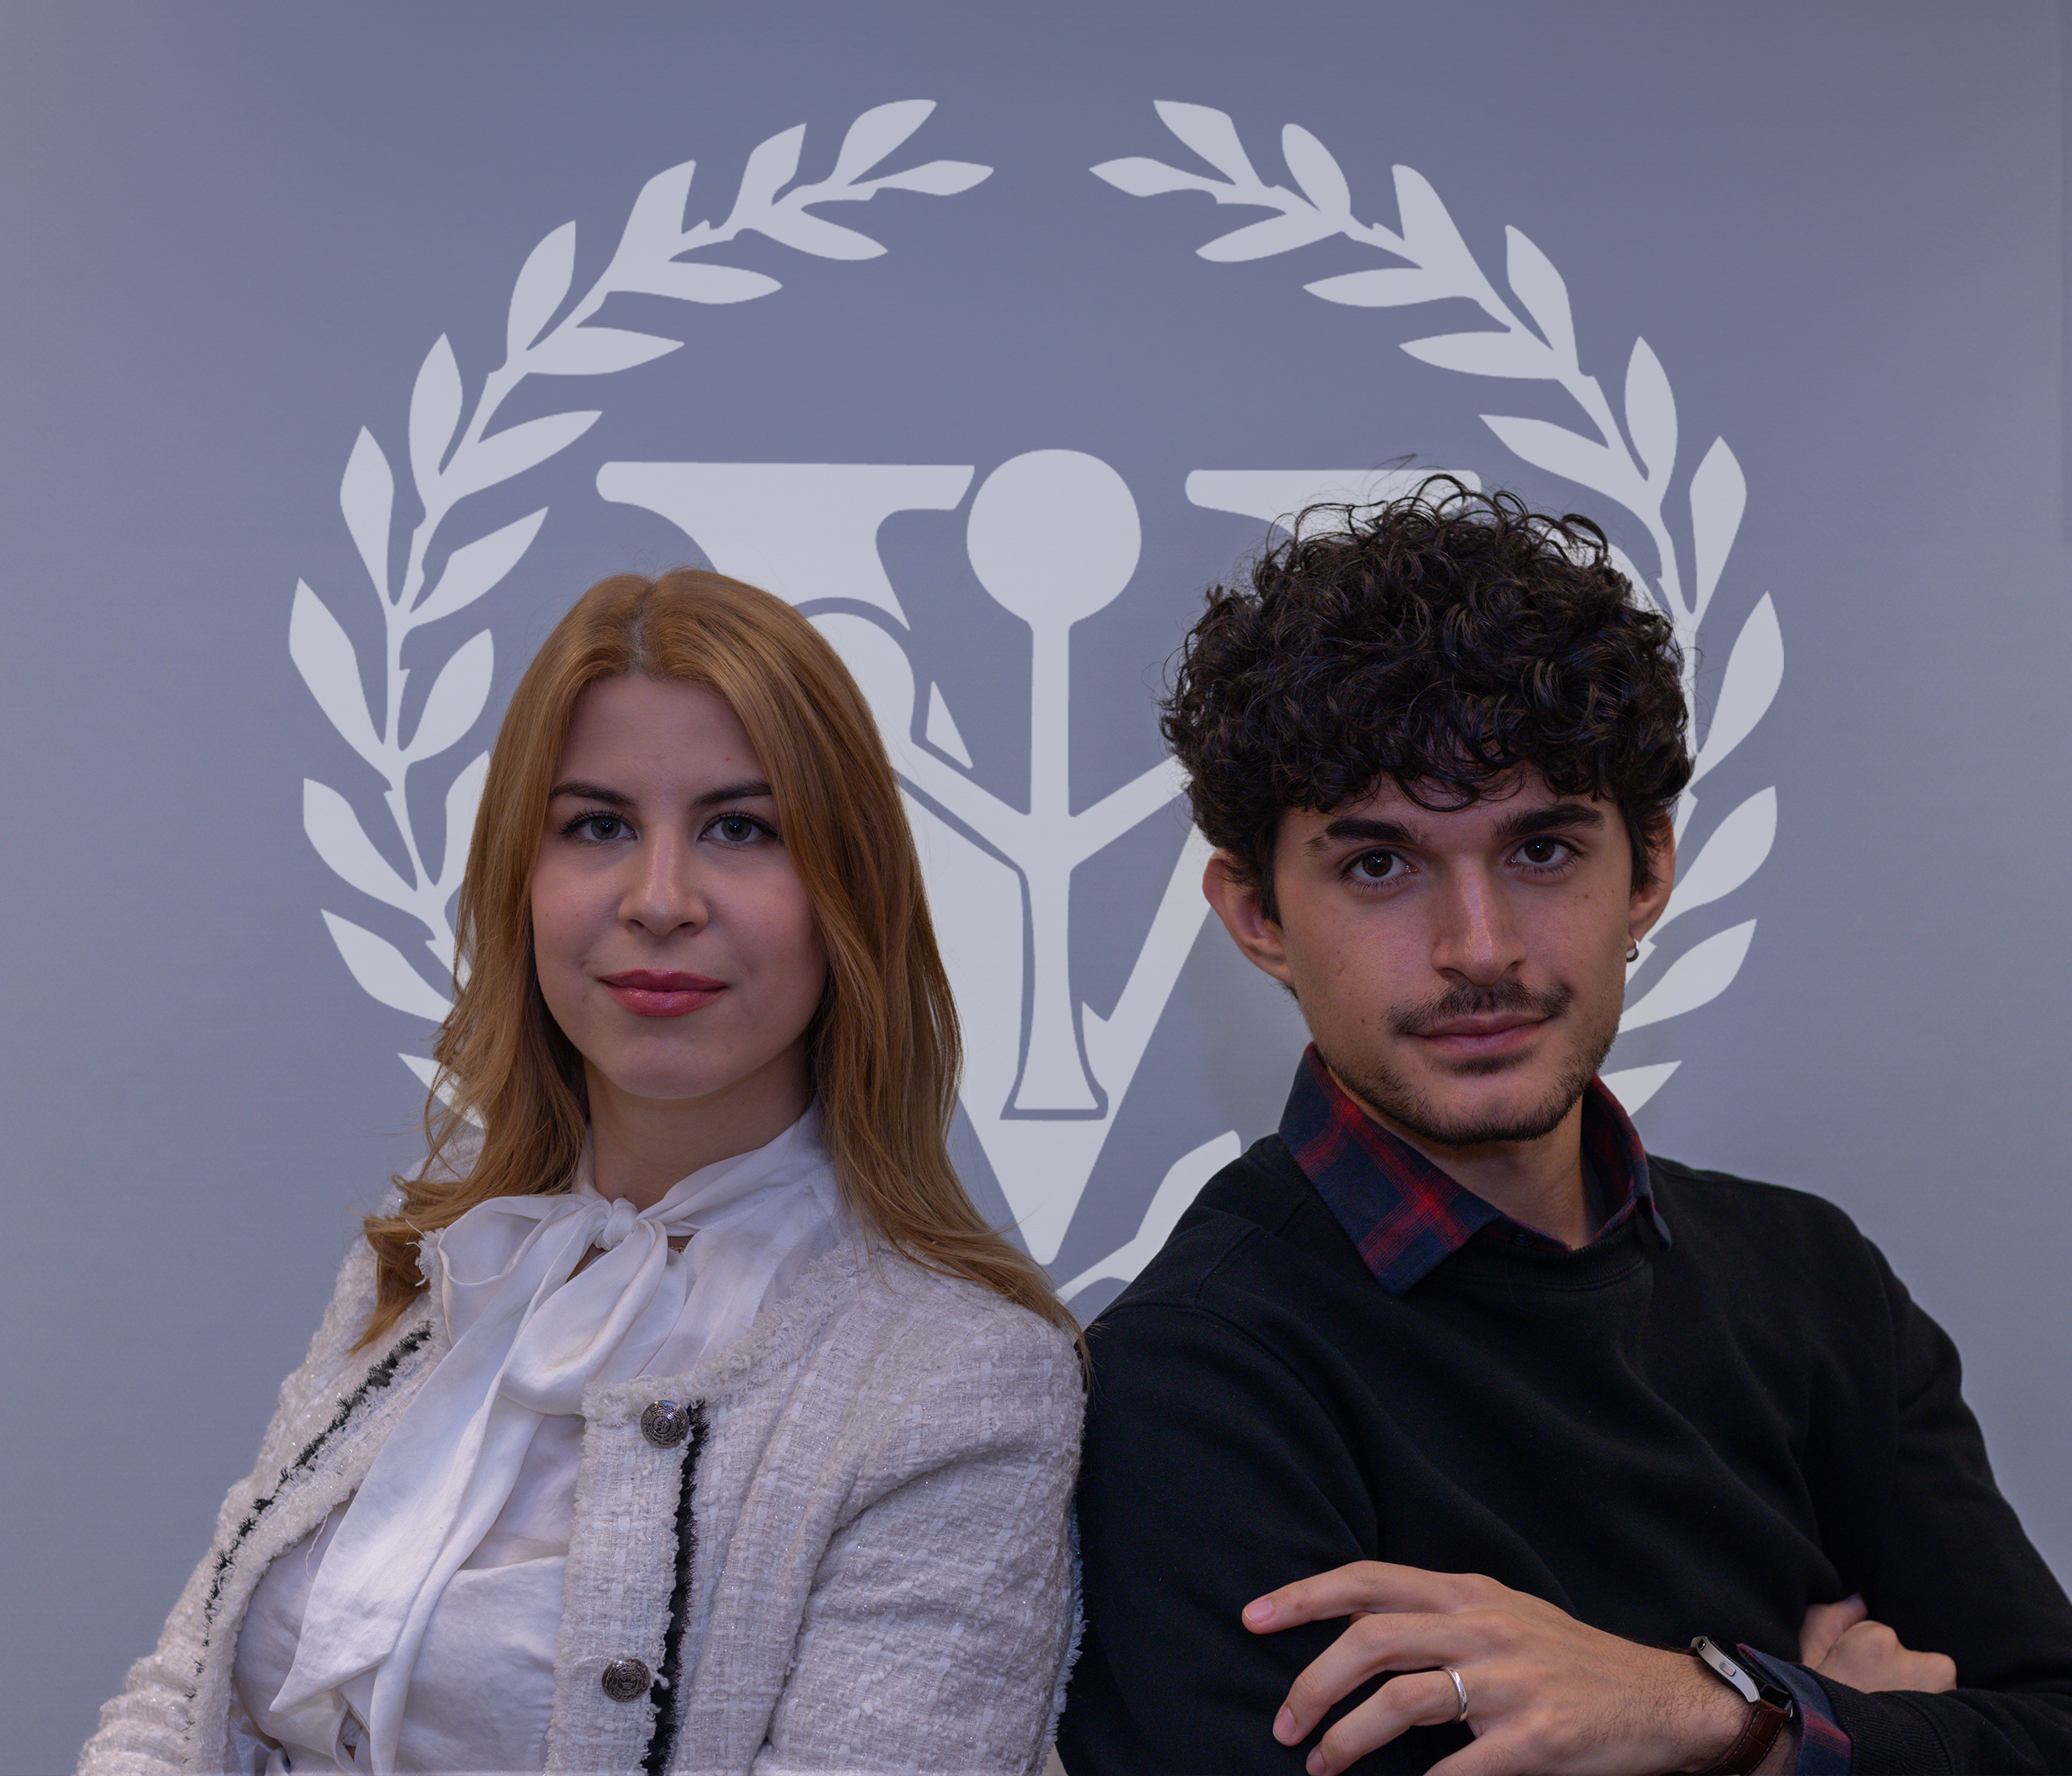 Caio Sobrinho, Chairperson of Marketing, and Fanni, Vice Chairperson of Marketing, of the Mälekon Marketing committee.